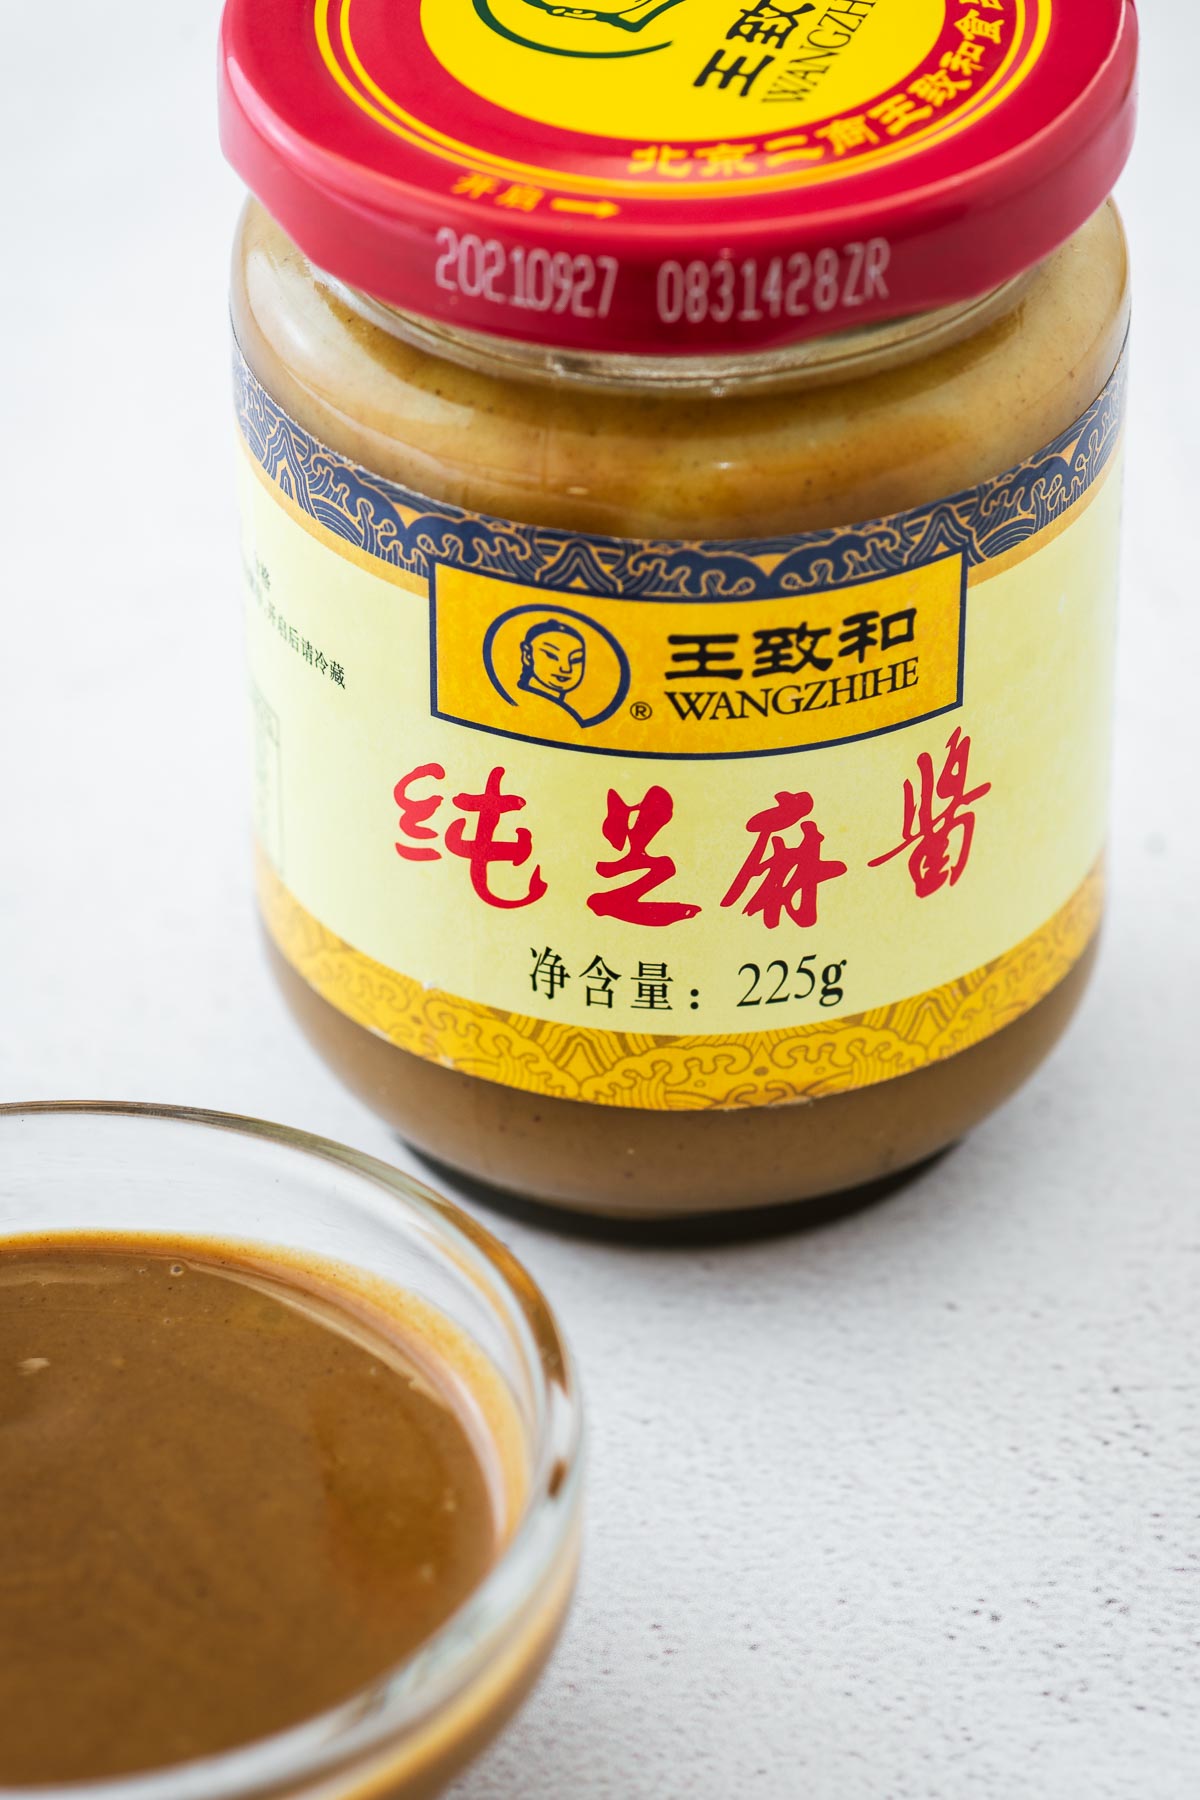 A jar of shop-bought Chinese sesame paste.